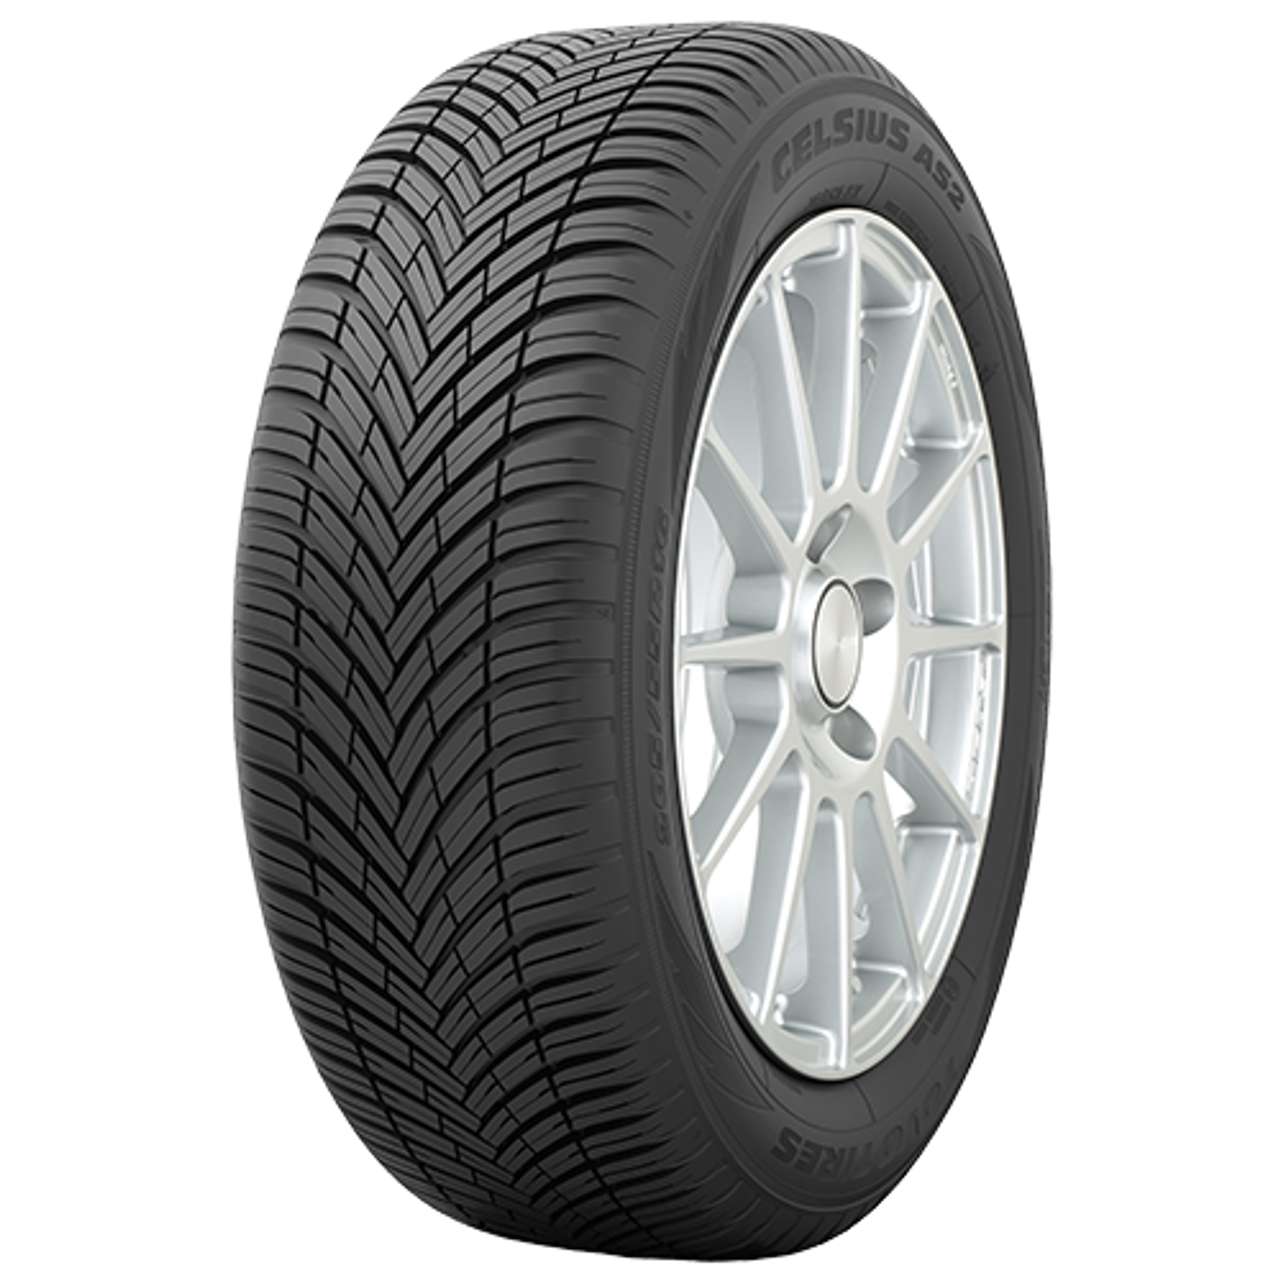 TOYO CELSIUS AS2 215/45R16 90V BSW